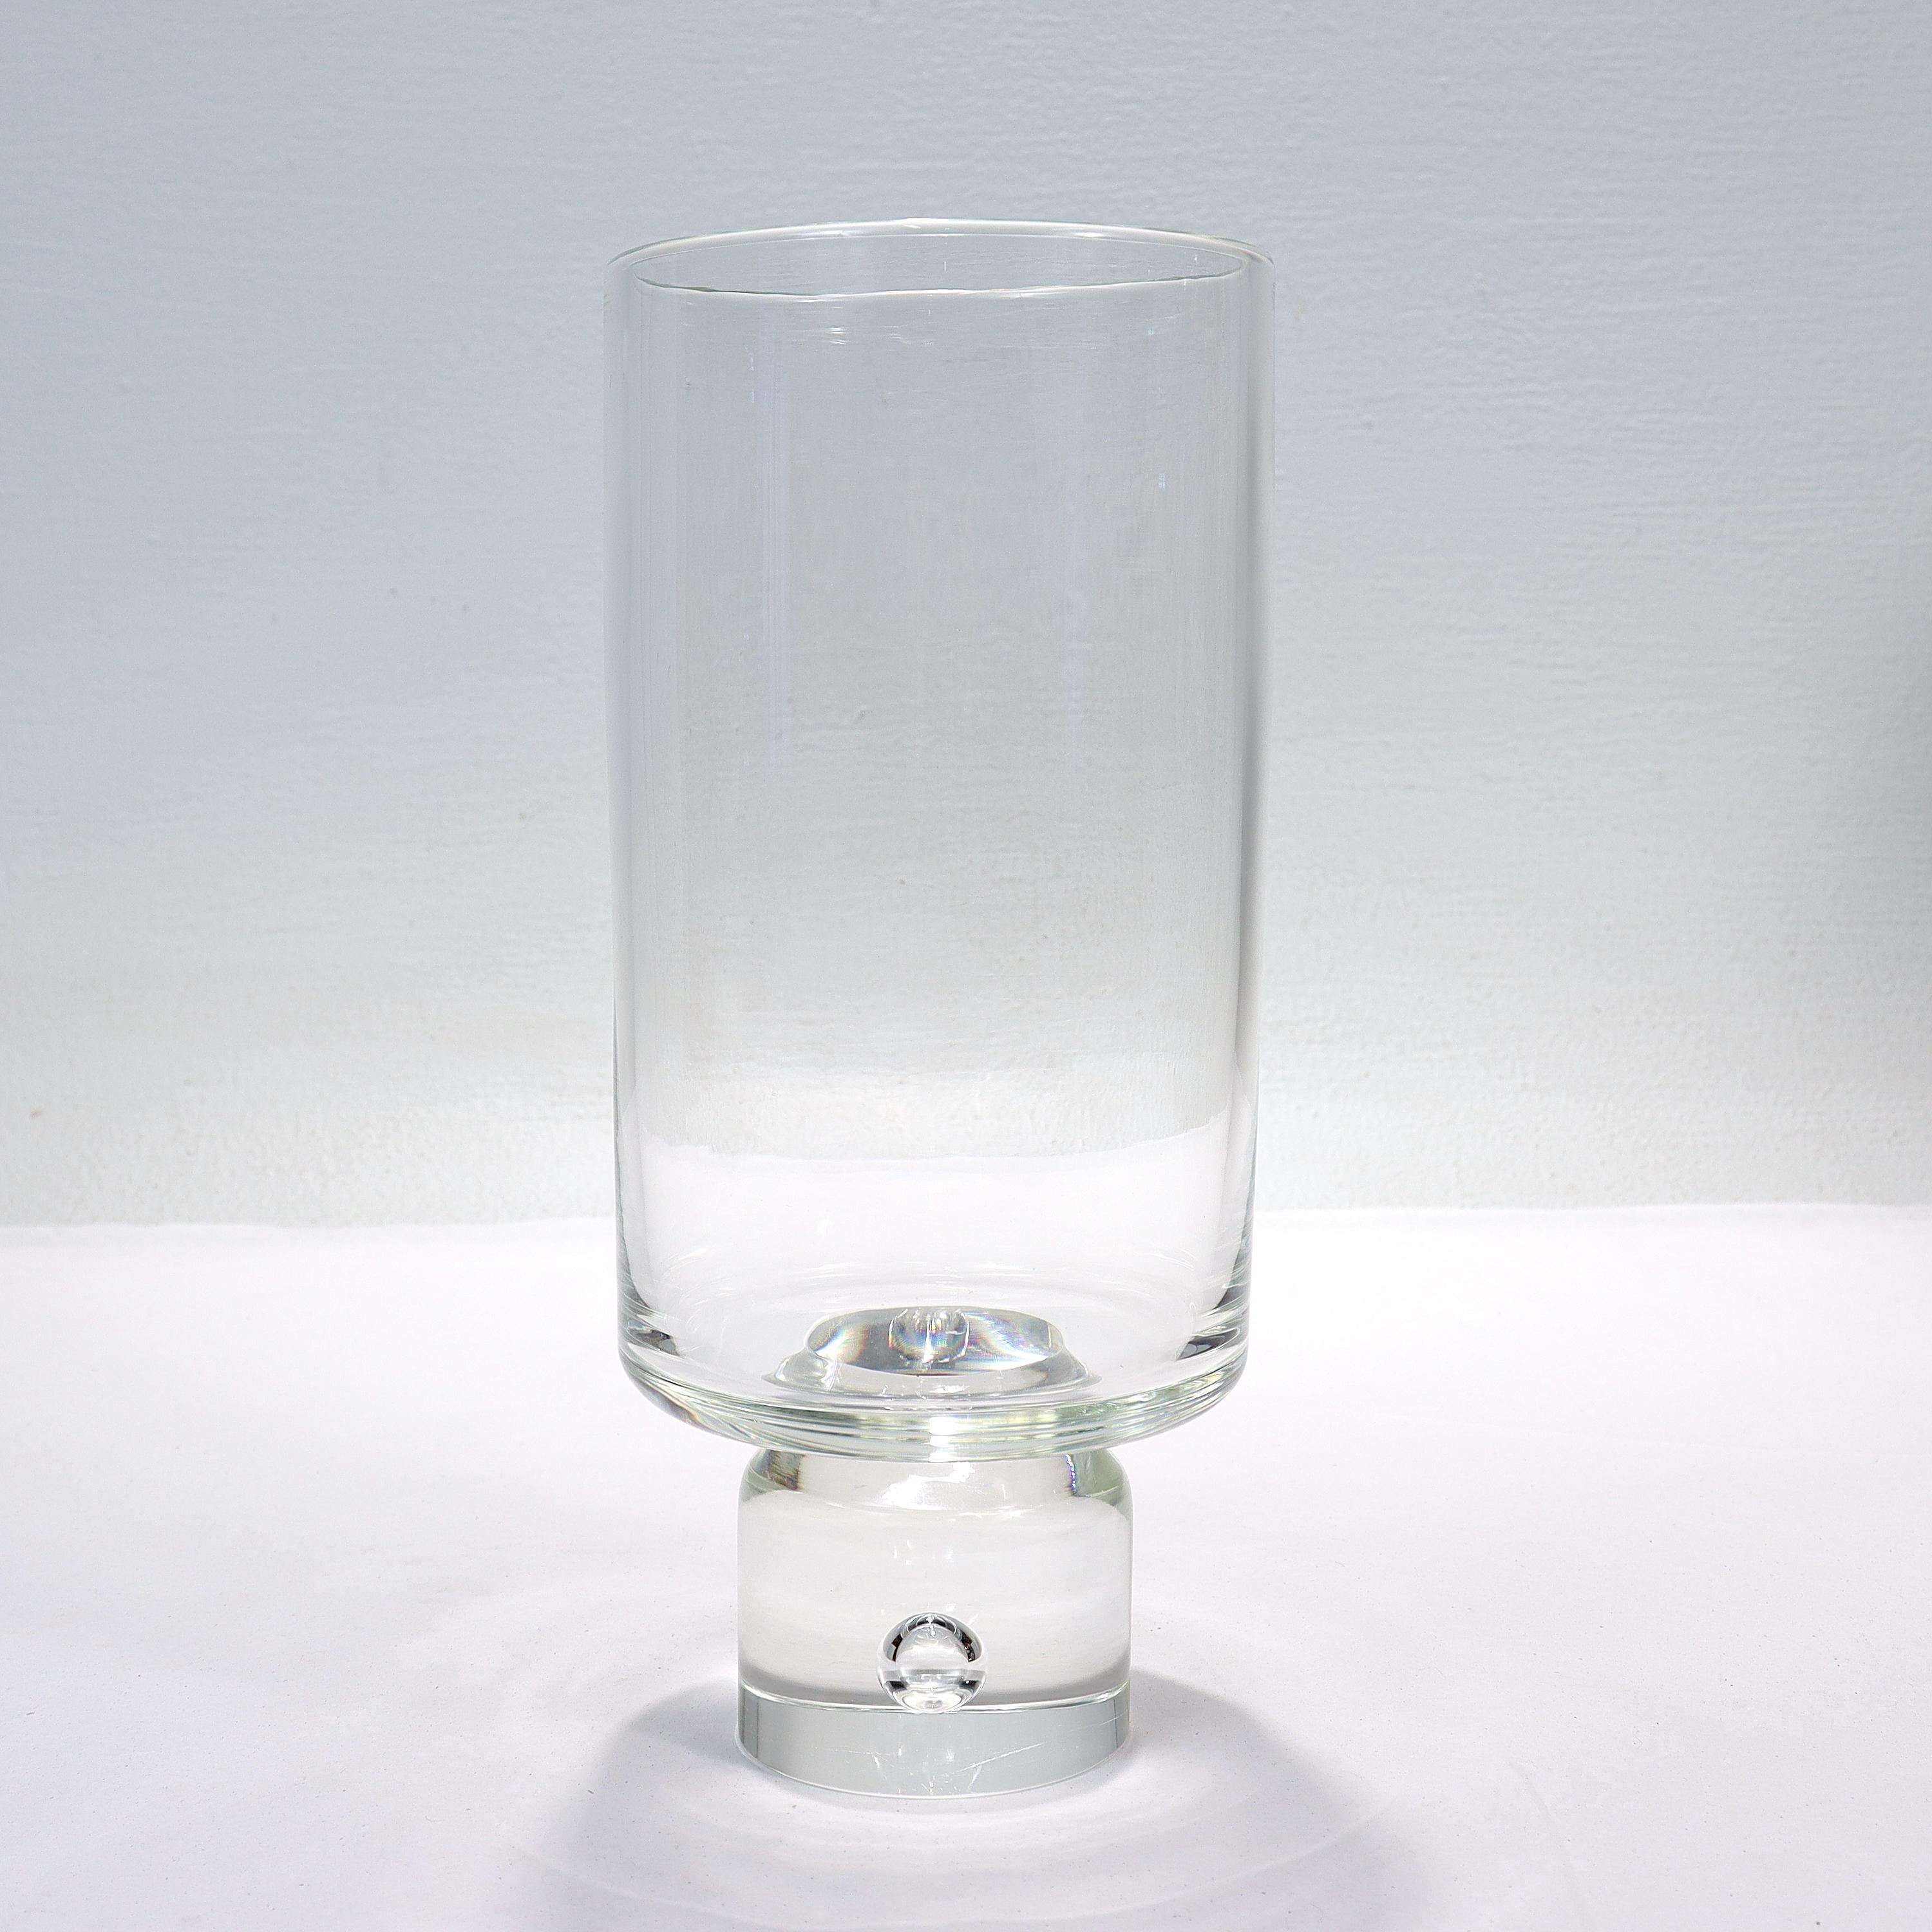 A fine Mid-Century Modern art glass vase.

By Steuben.

With tall, cylindrical side walls supported by a solid cylindrical base containing a captured bubble.

Simply great Mid-Century American design! 

Date:
Mid-20th century

Overall